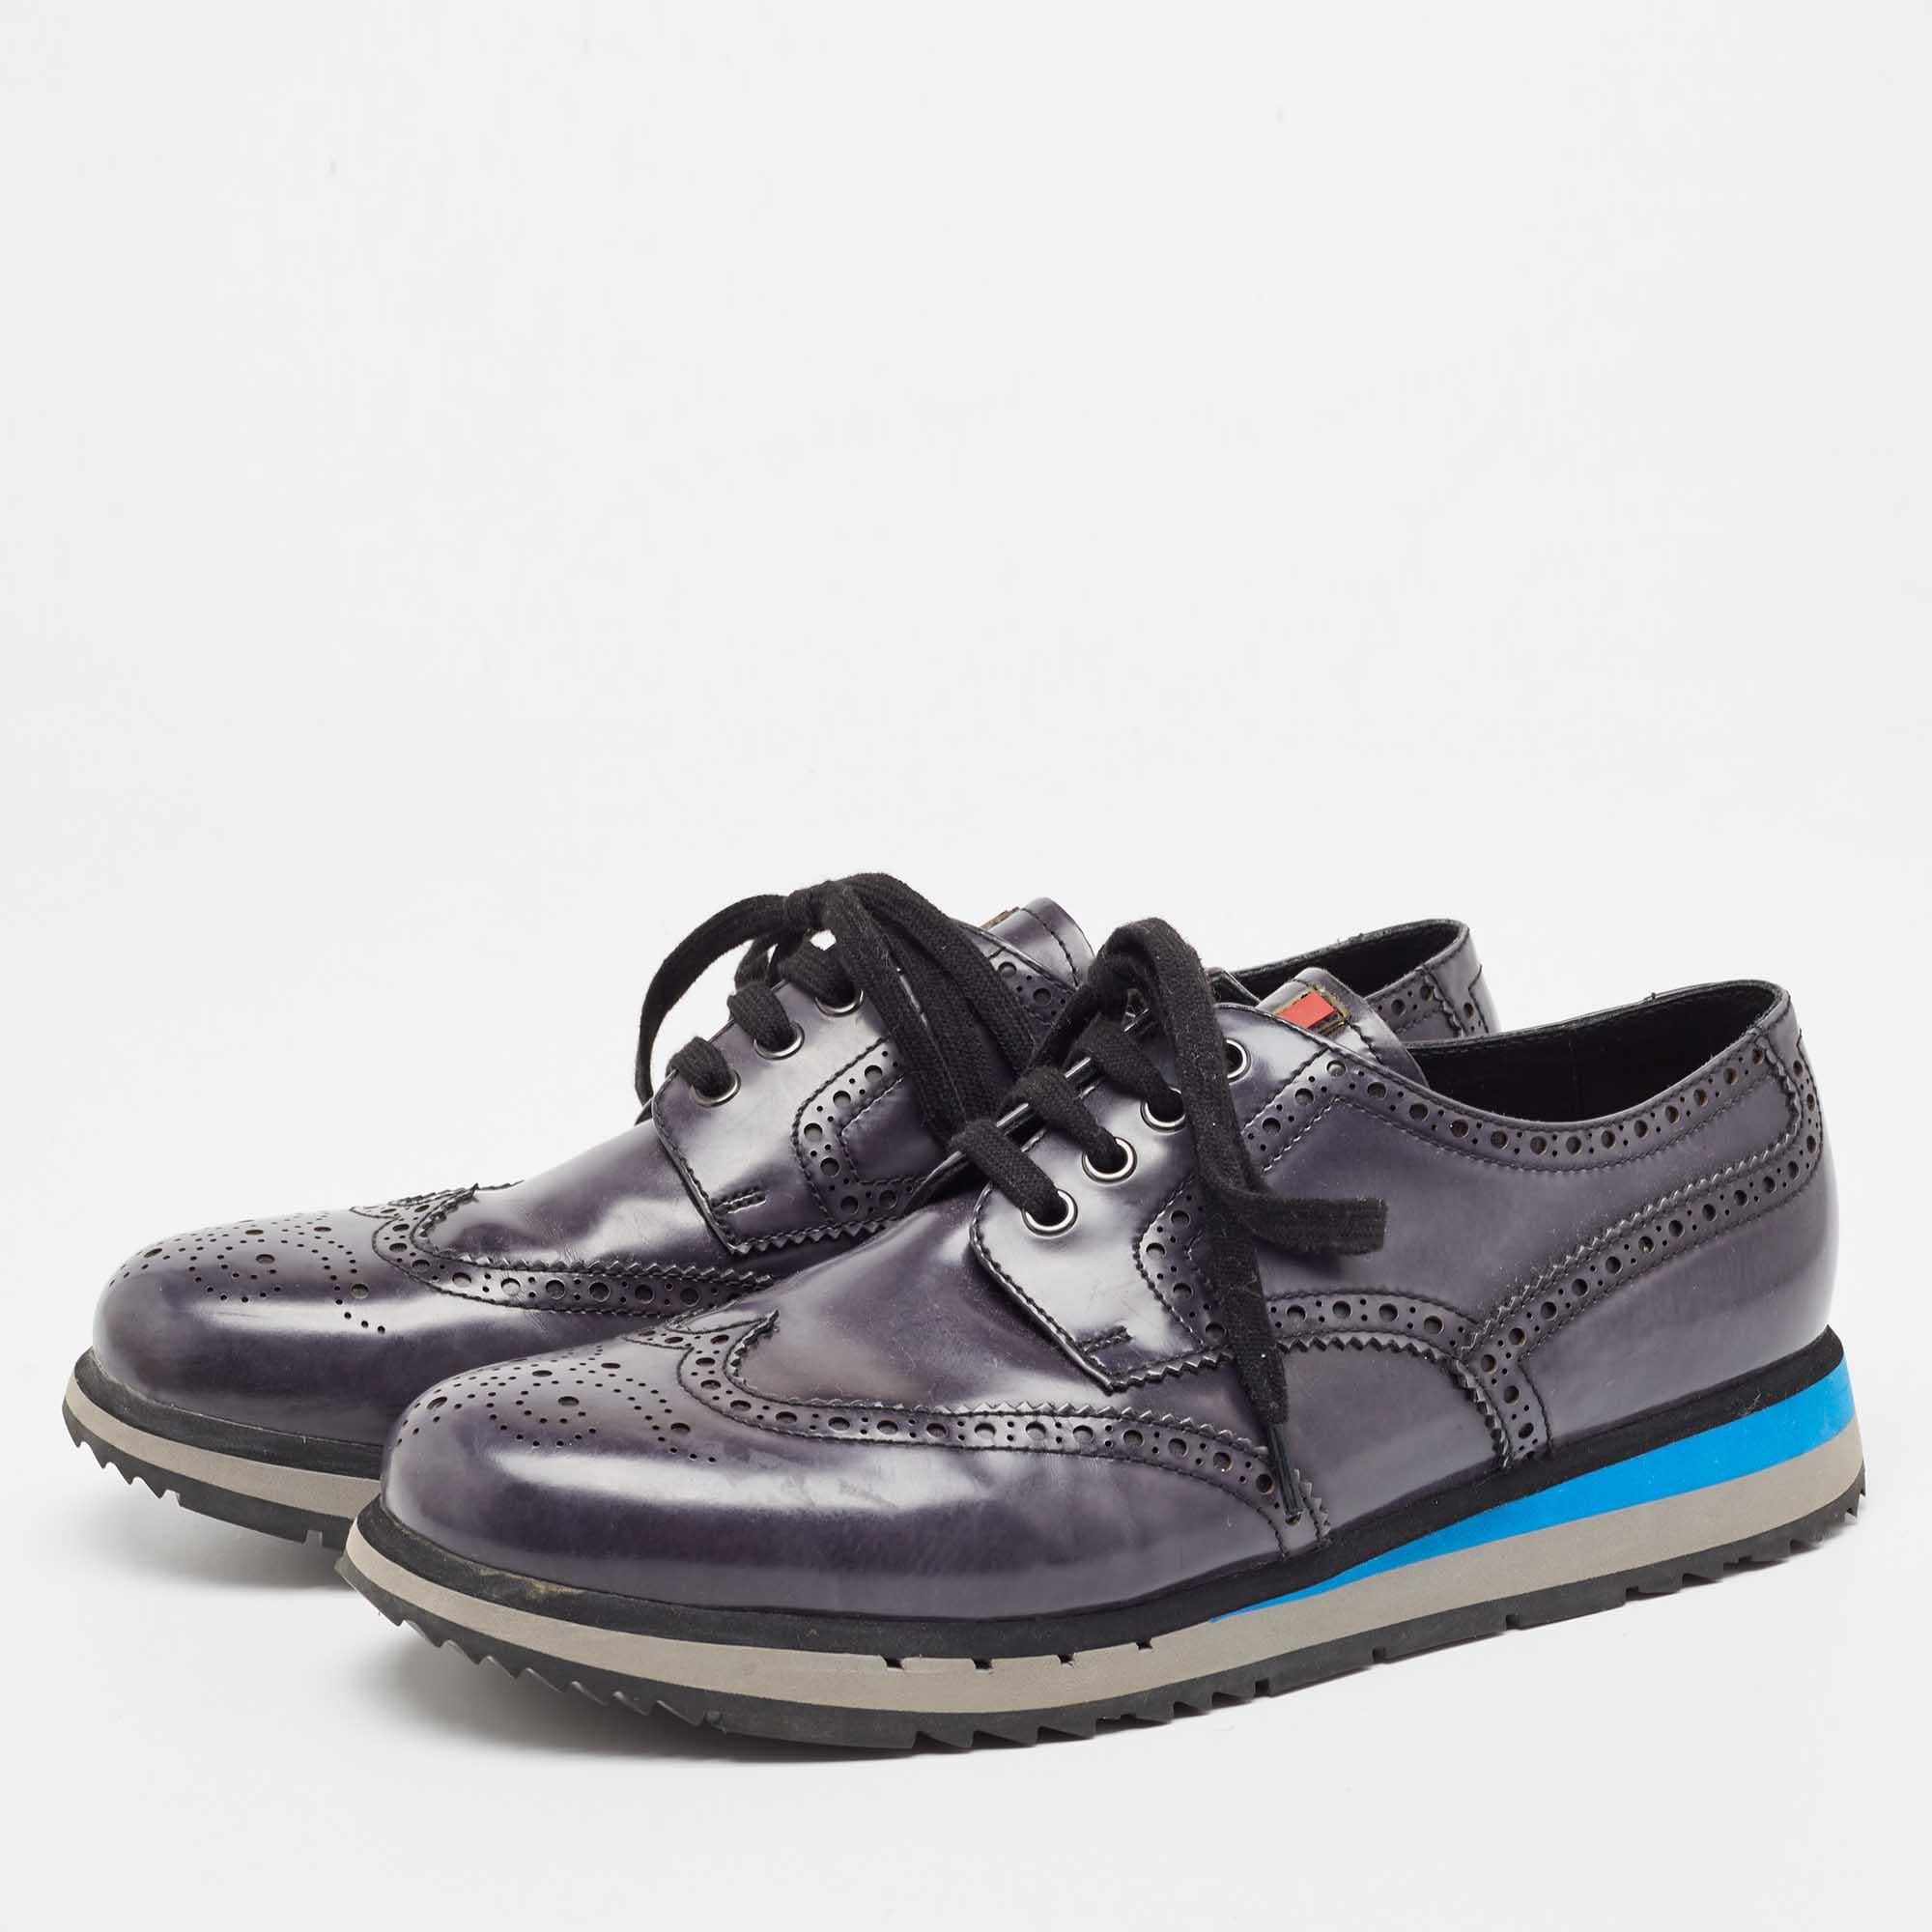 Look effortlessly classy by framing your feet with these Prada sneakers. Beautifully crafted in brogue detailing, the pair comes covered in leather, features lace-up vamps, and rubber soles.

